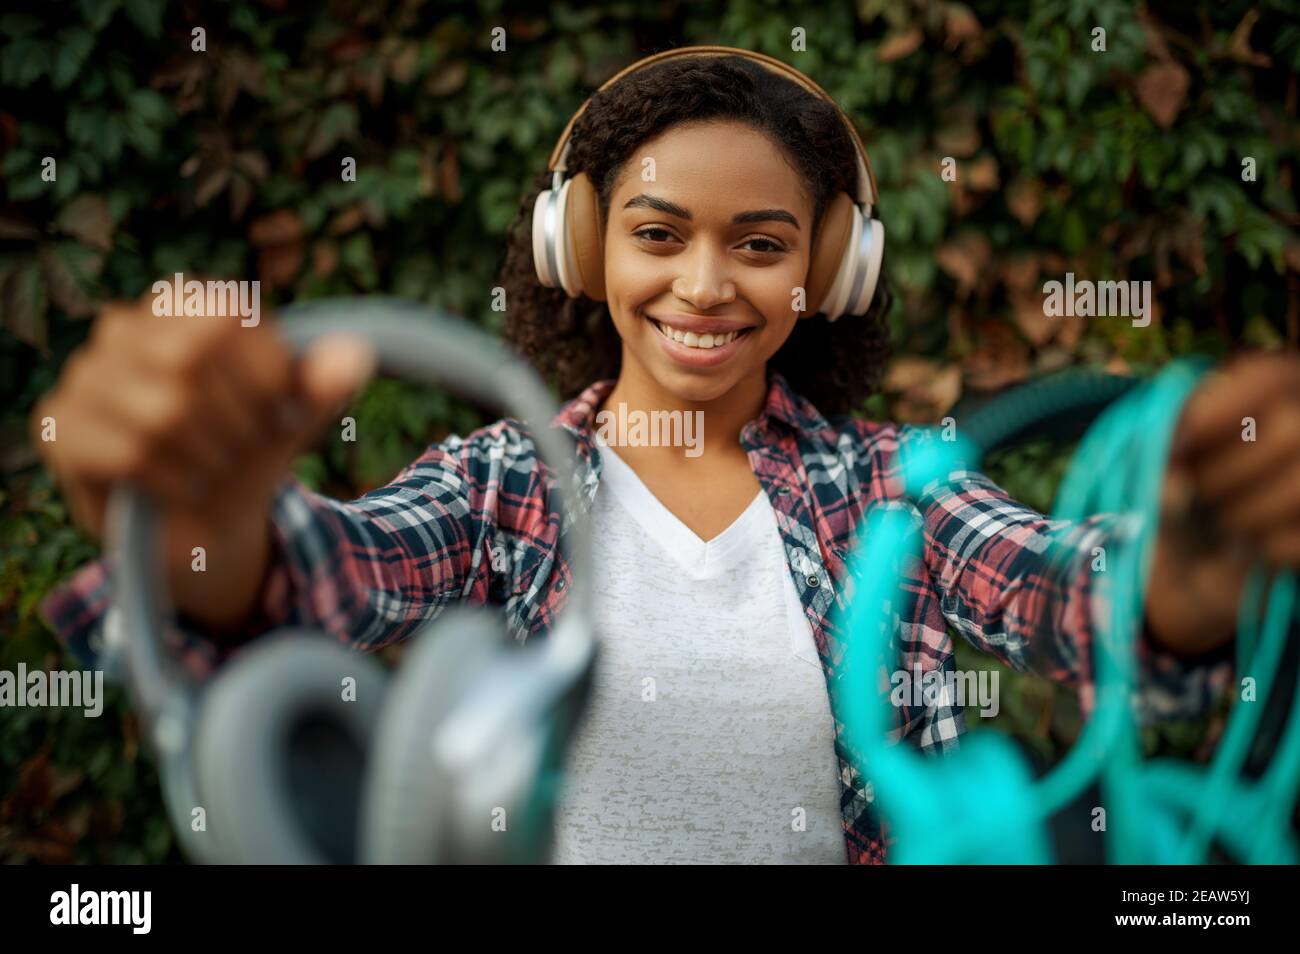 Music fan in headphones listening to music in park Stock Photo